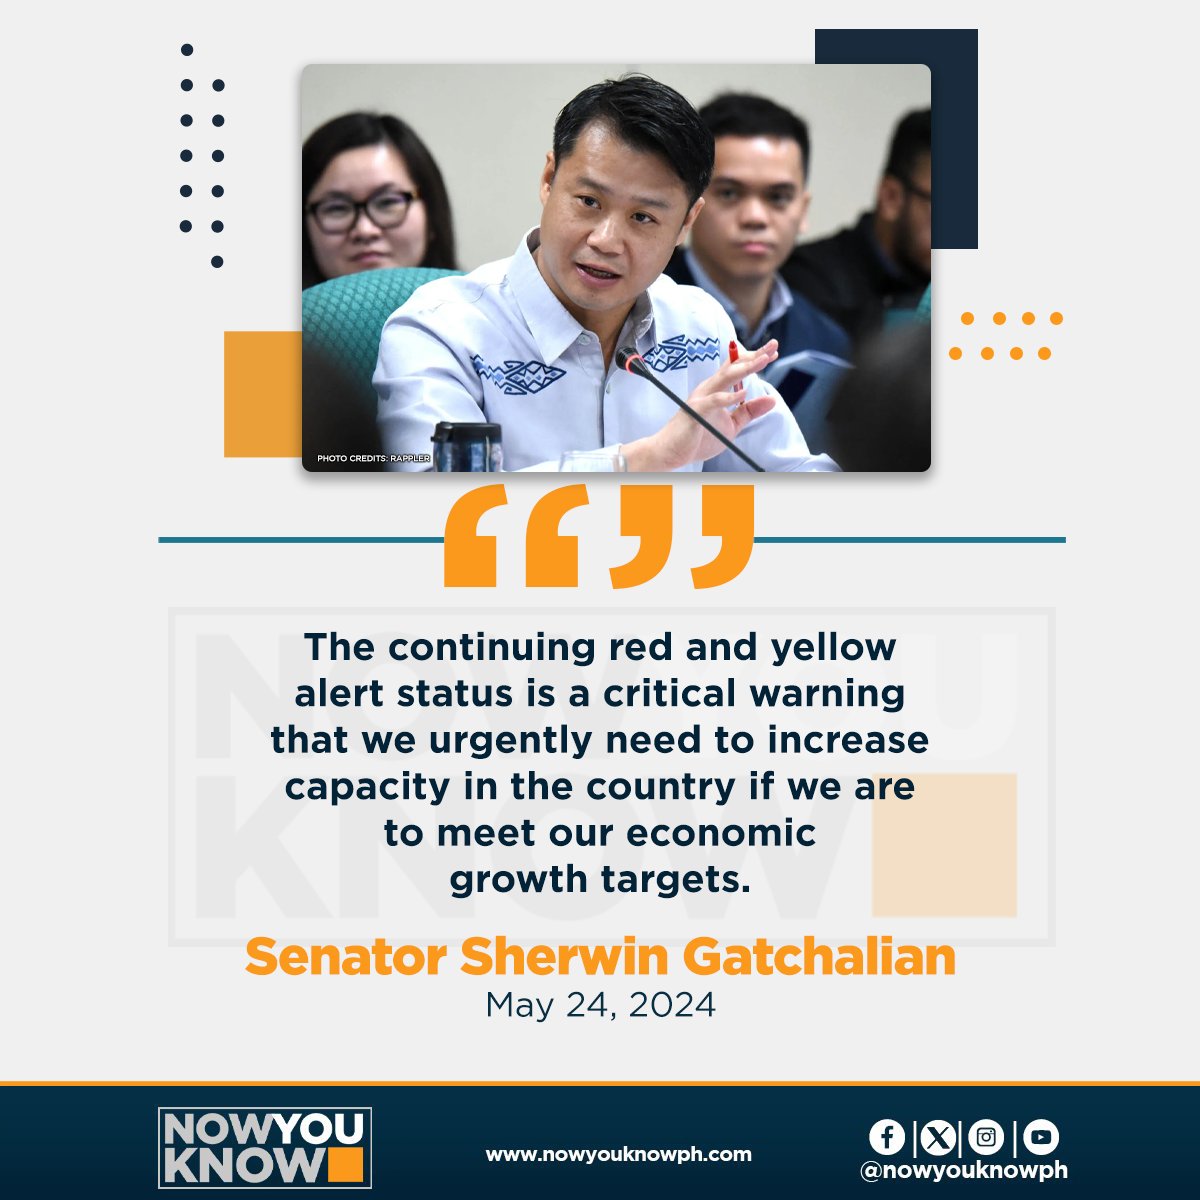 The continuing red and yellow alerts in Luzon and Visayas grids emphasize the need for an increase in the country’s energy capacity, especially when considering economic targets, said Senator Sherwin Gatchalian Friday. READ: tinyurl.com/4xzdmzh7 📰Inquirer.net